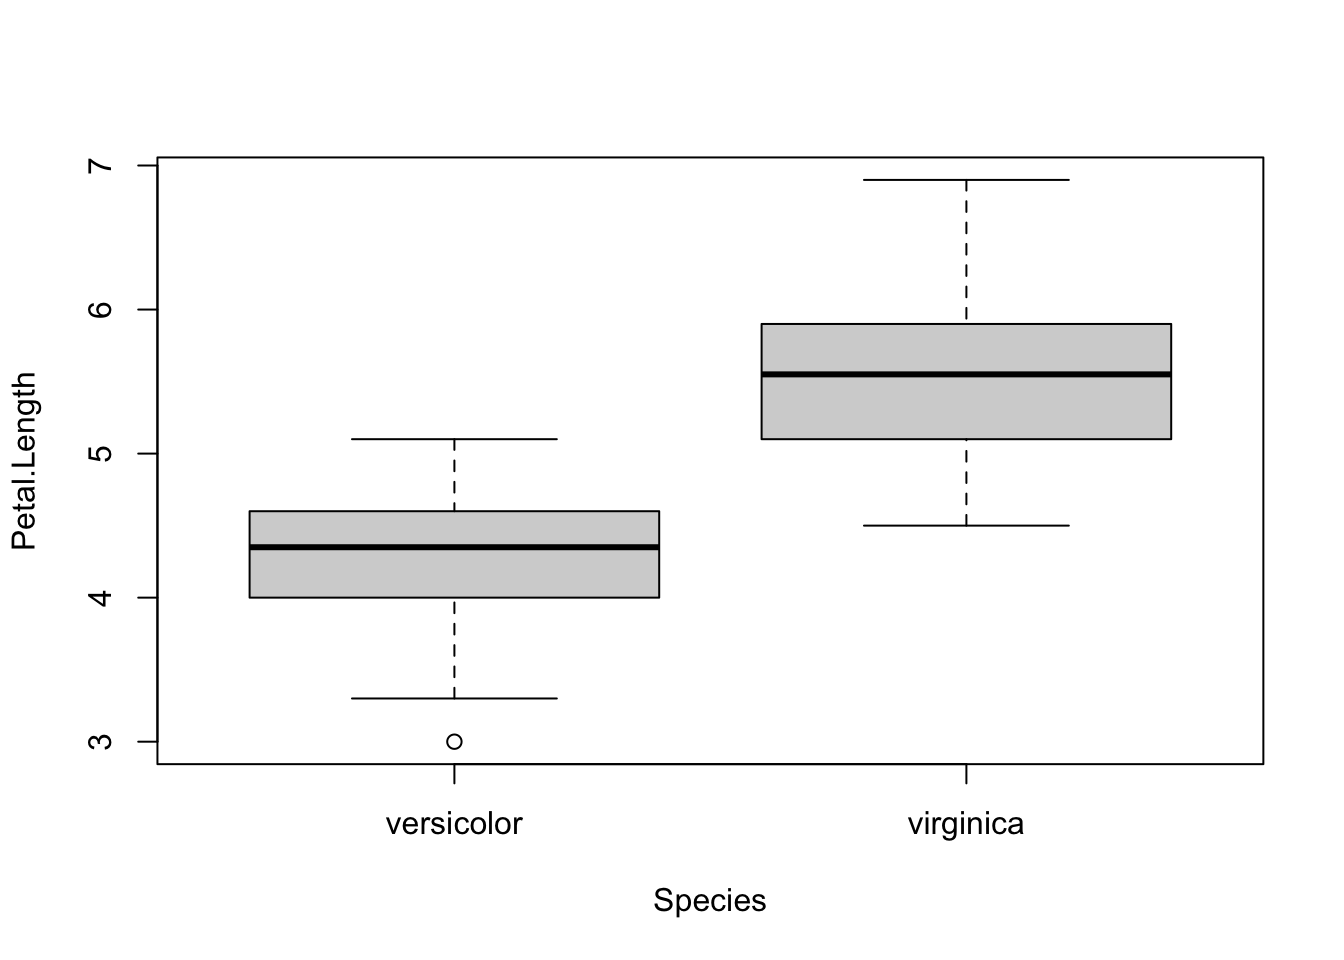 How To Do A T-Test Or Anova For More Than One Variable At Once In R? -  Stats And R